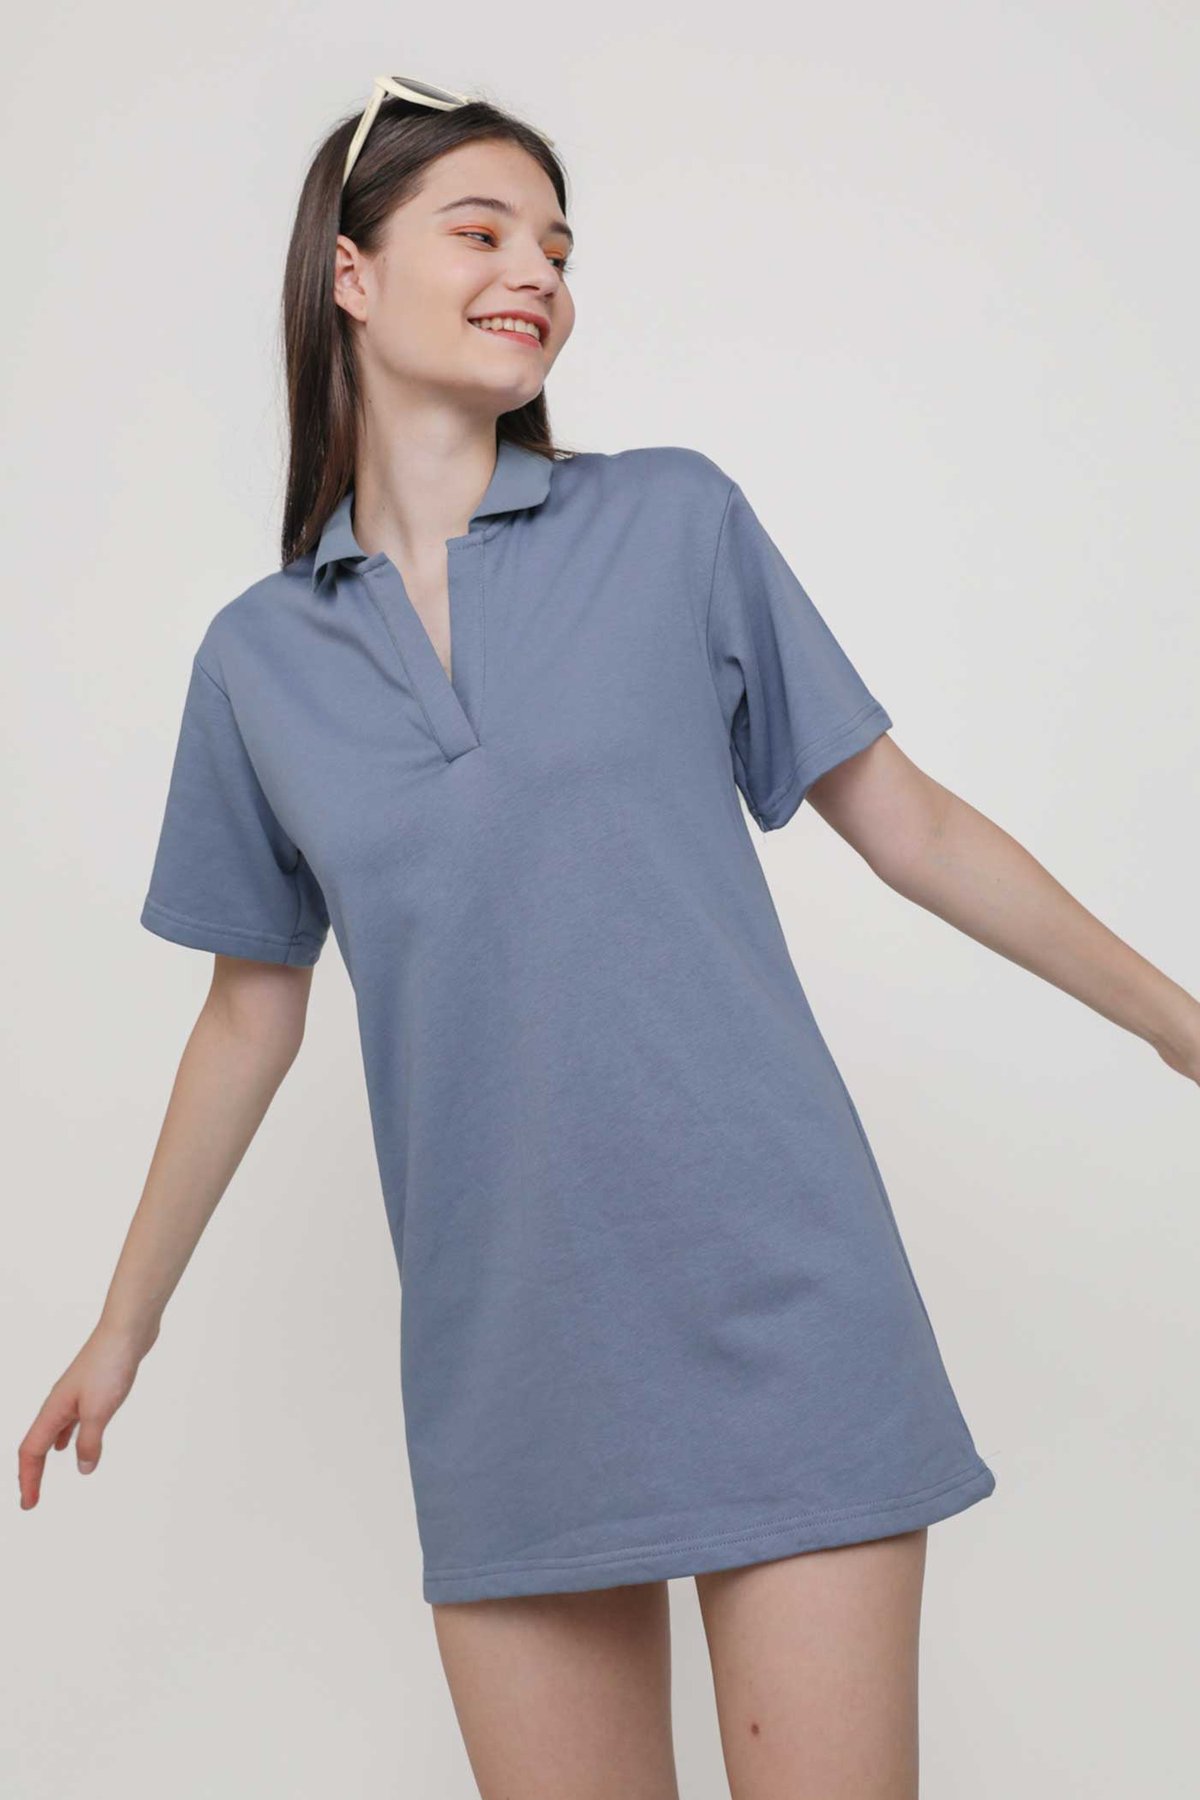 Anderson Polo Dress (Periwinkle)